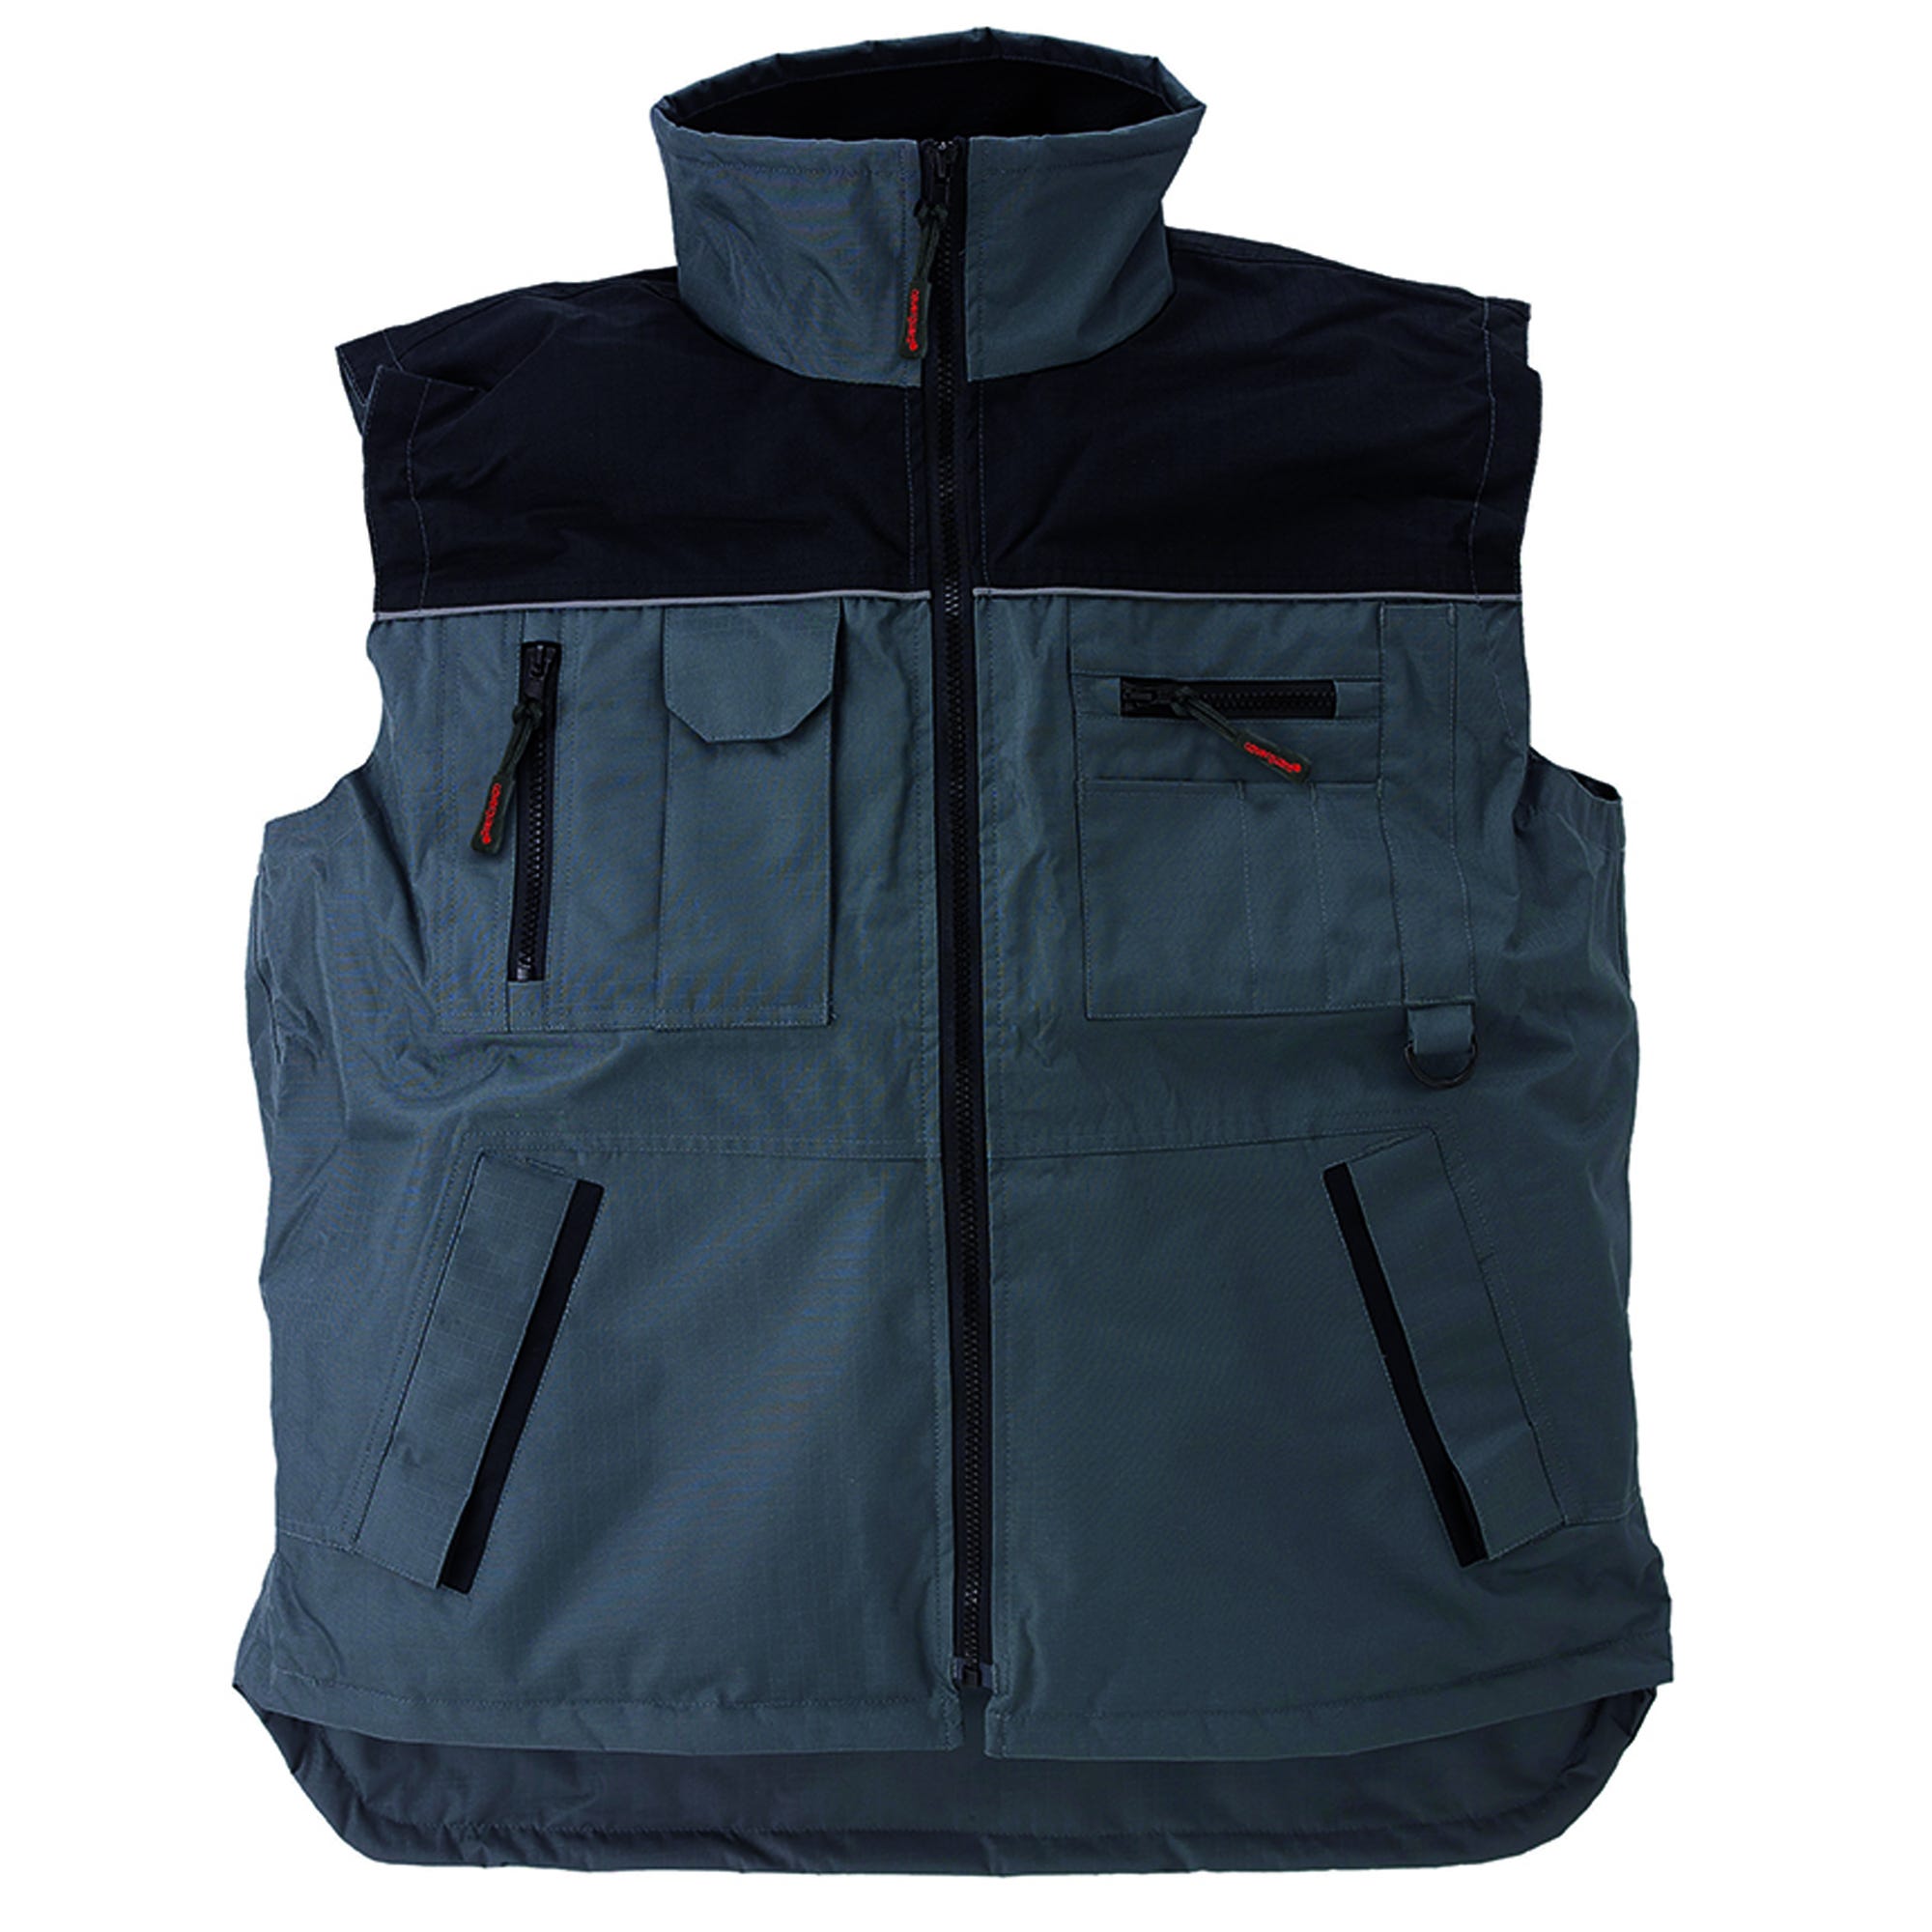 RIPSTOP Gilet Froid gris/noir, Polyester Ripstop + Polaire 280g/m² - COVERGUARD - Taille 3XL 1